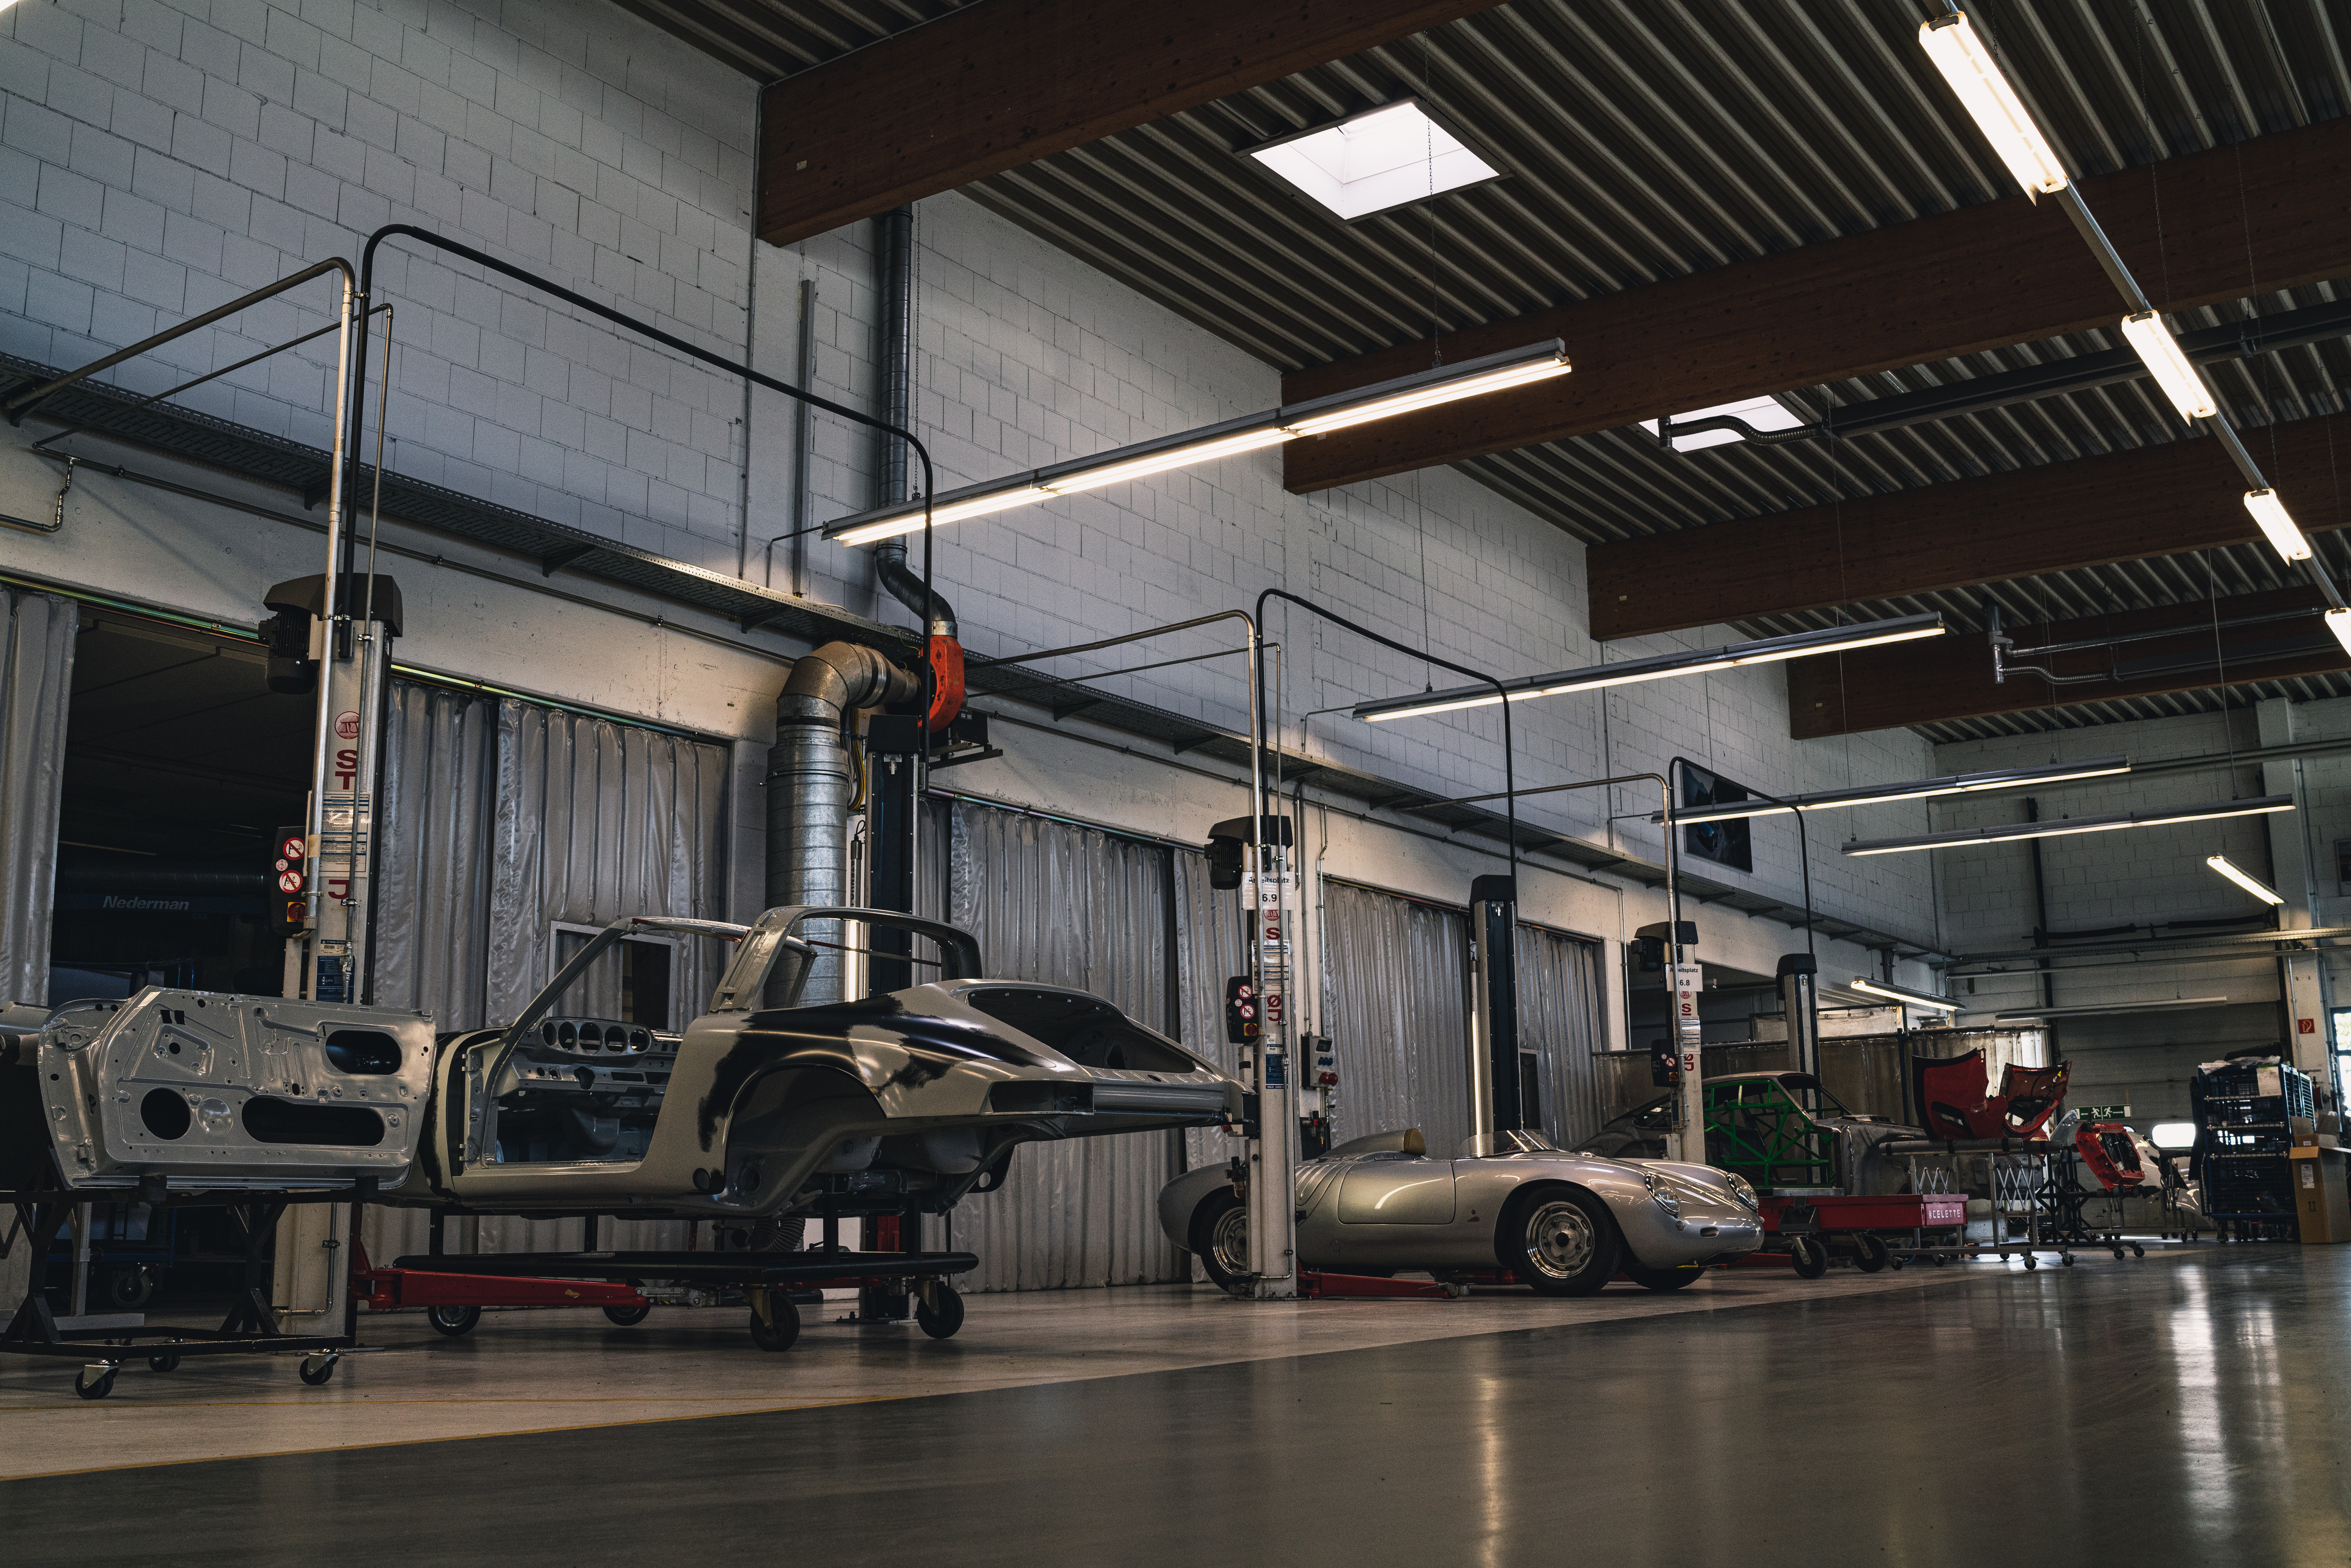 View of Porsche Classic workshop with bays containing cars